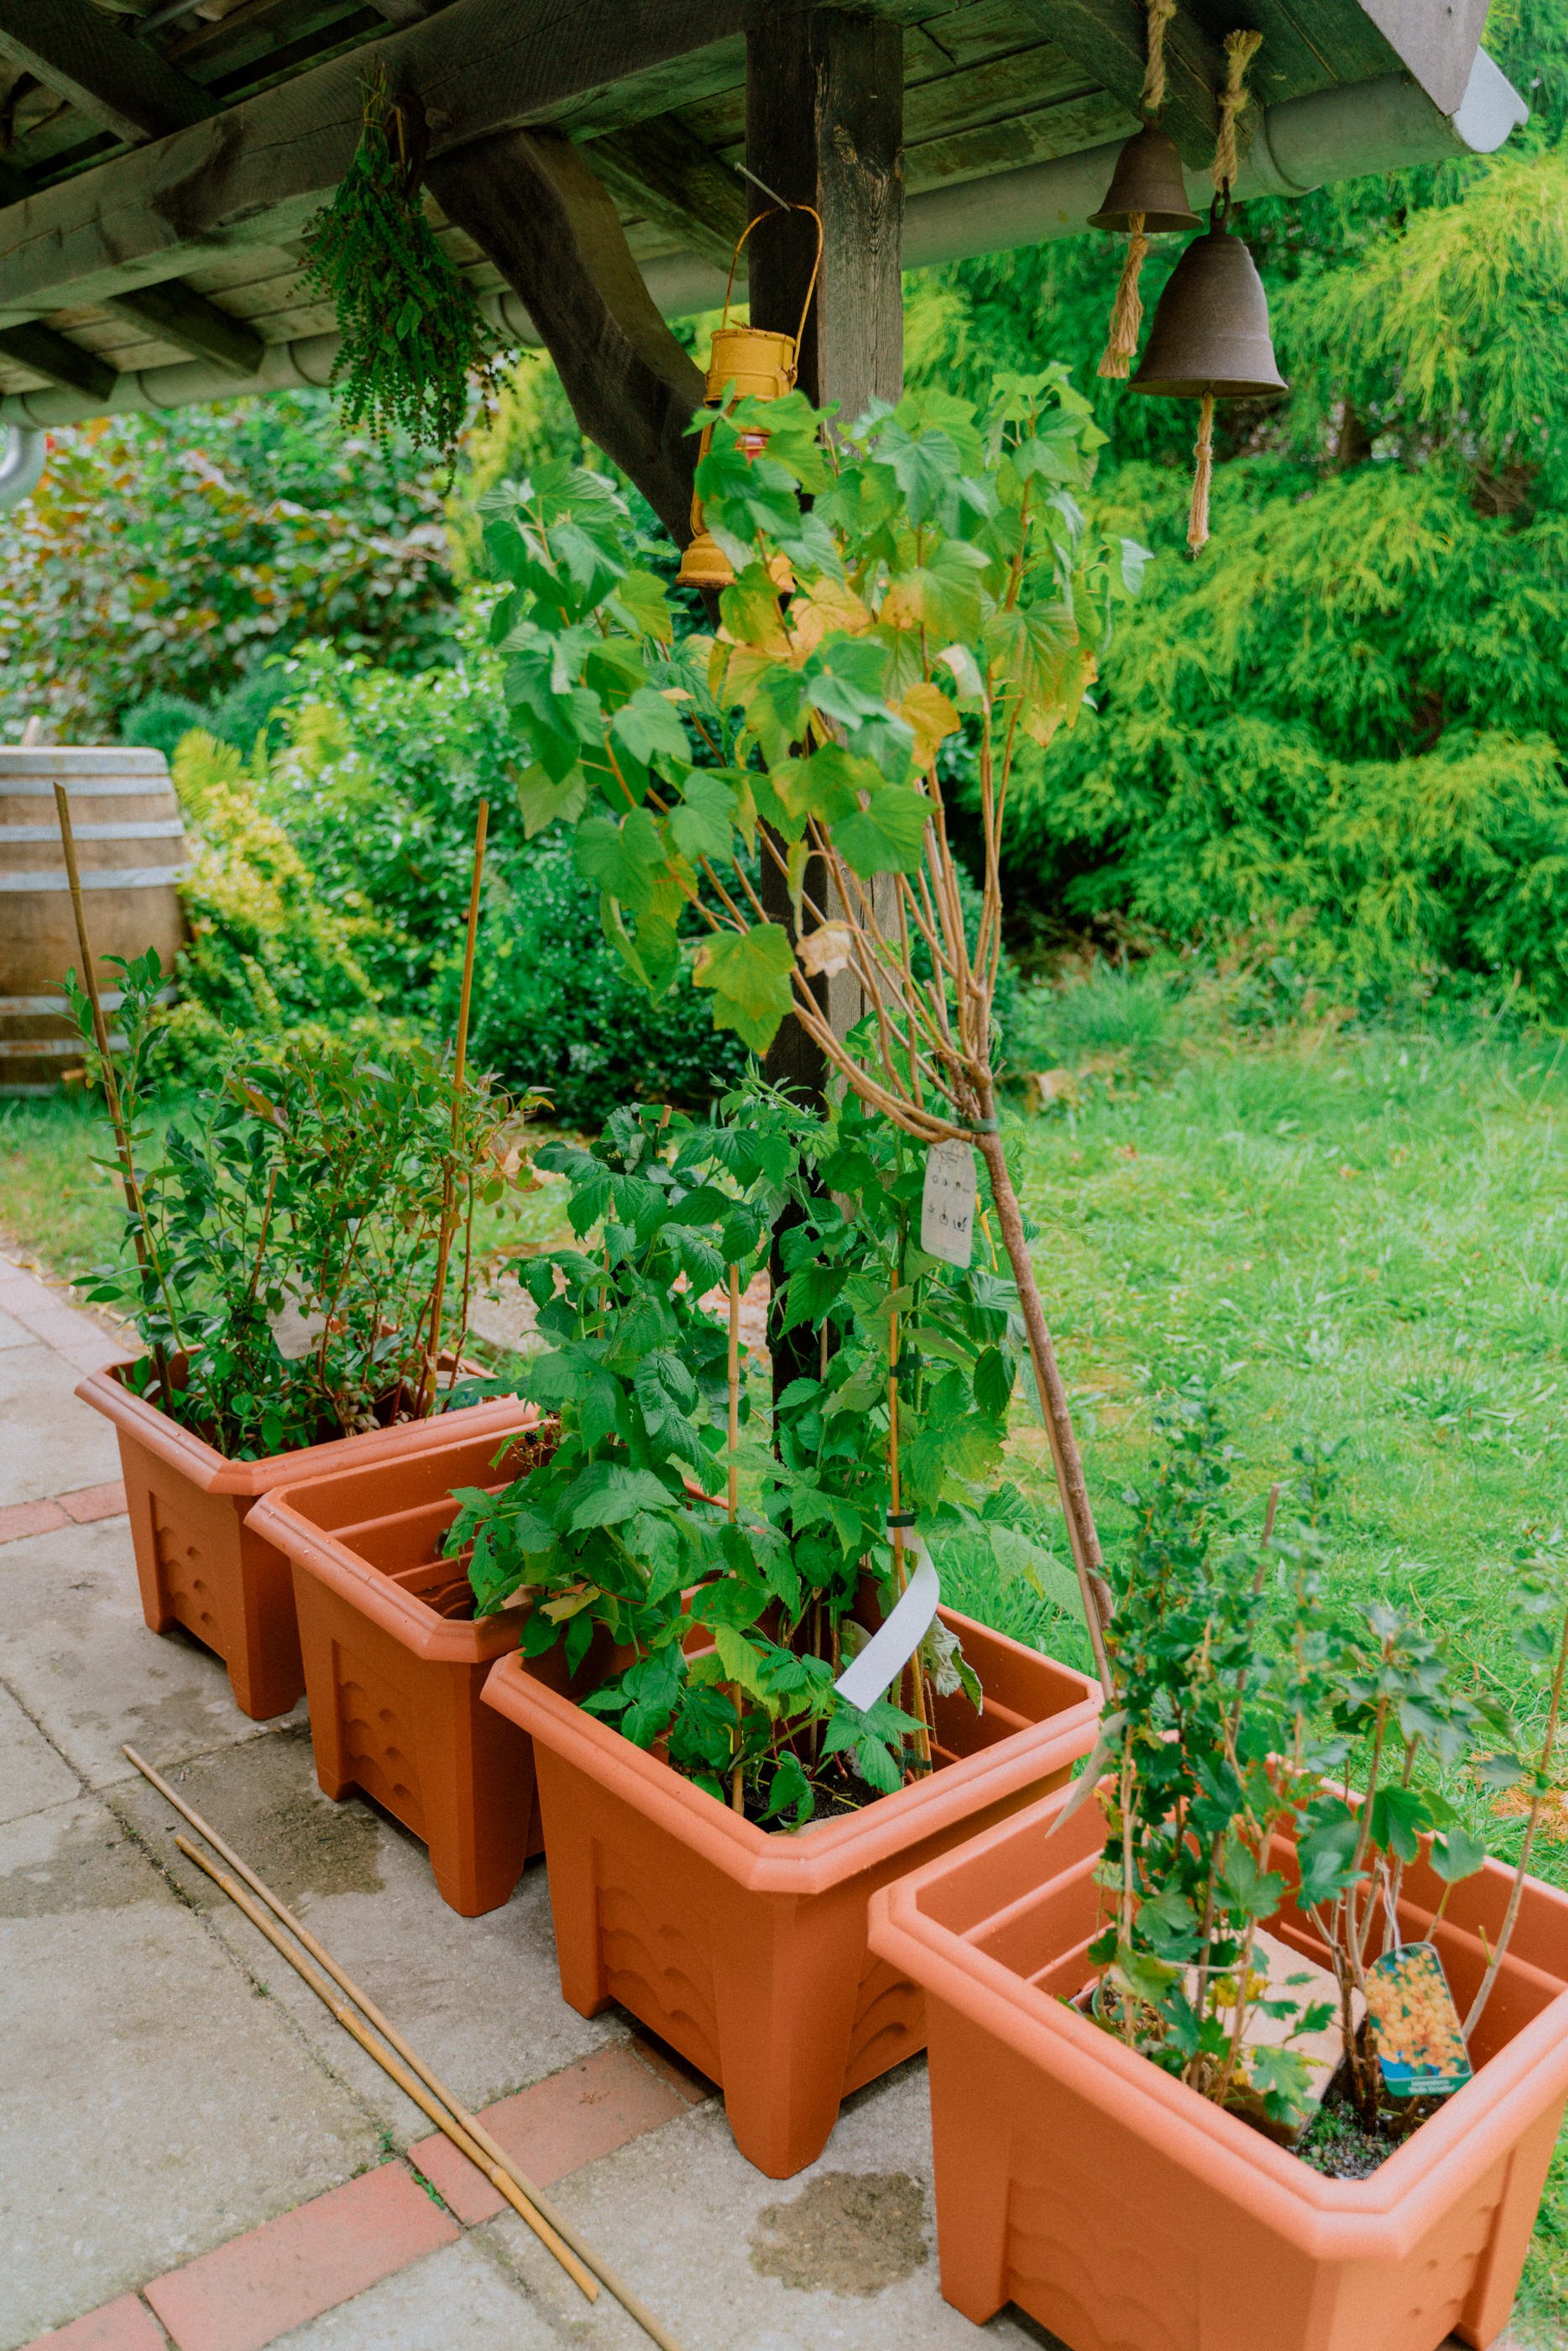 How to Grow Berries in Containers - Her86m2 4.jpg